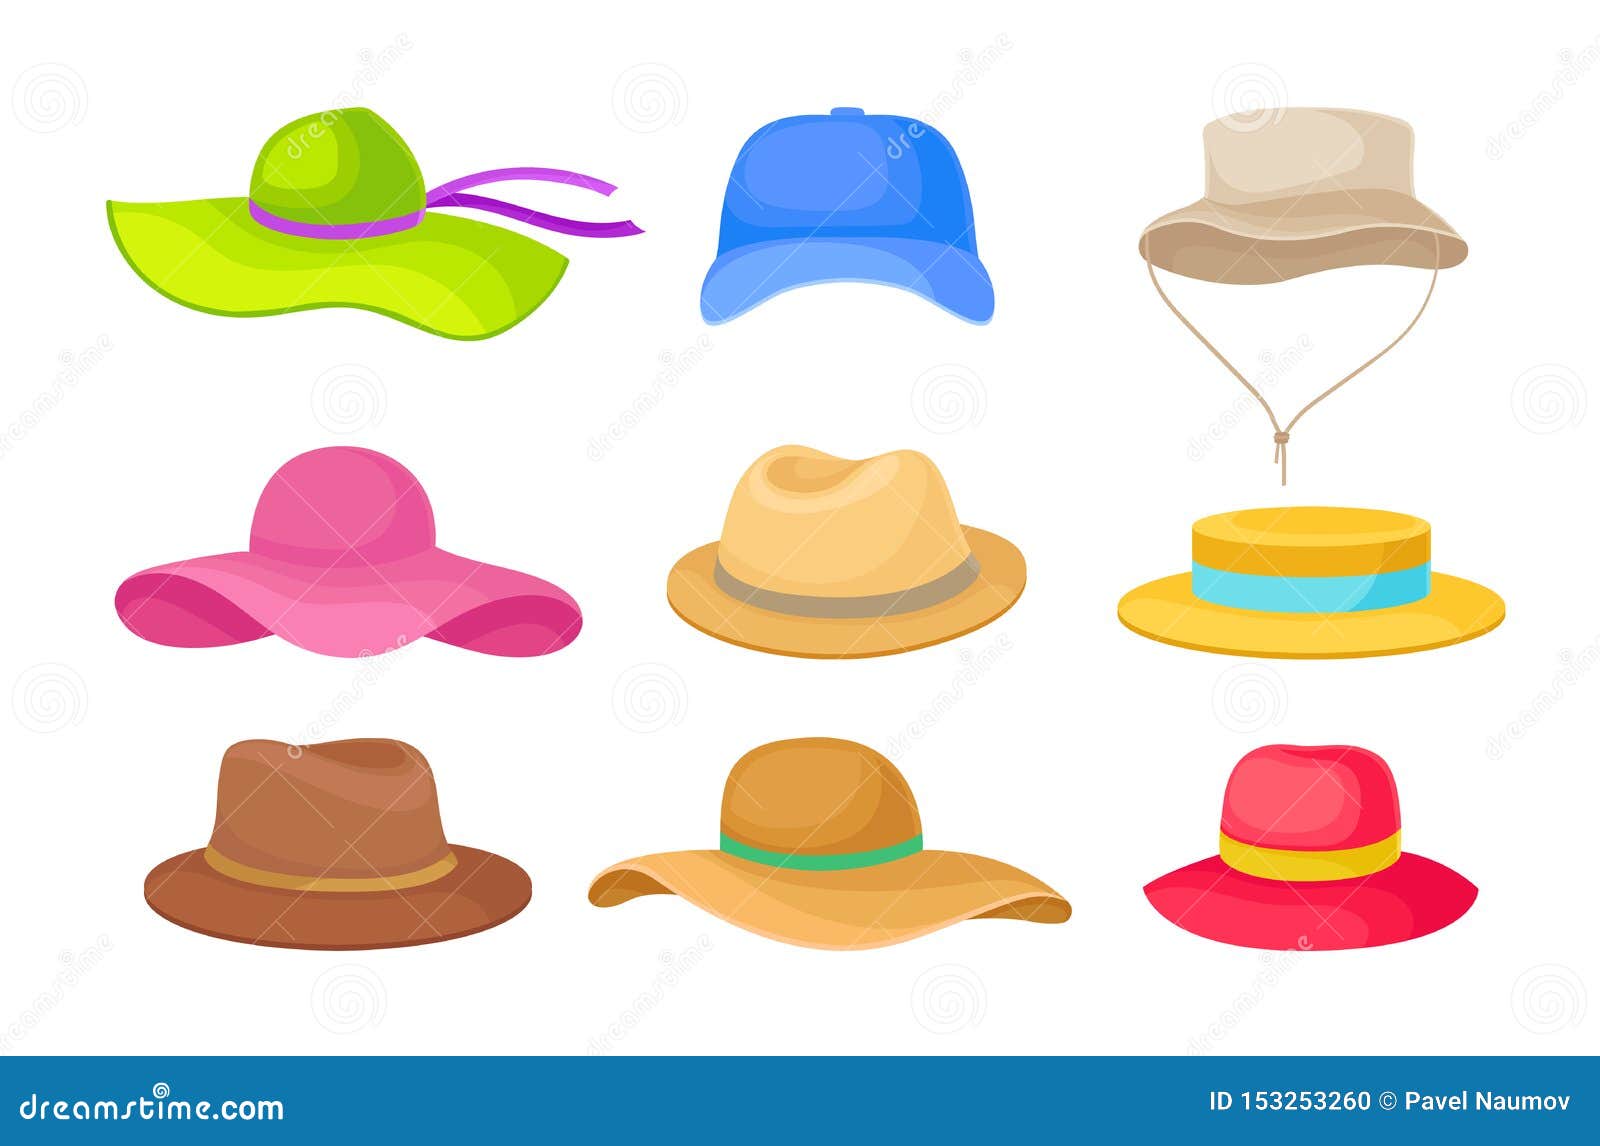 Set of Different Summer Hats. Vector Illustration on White Background ...